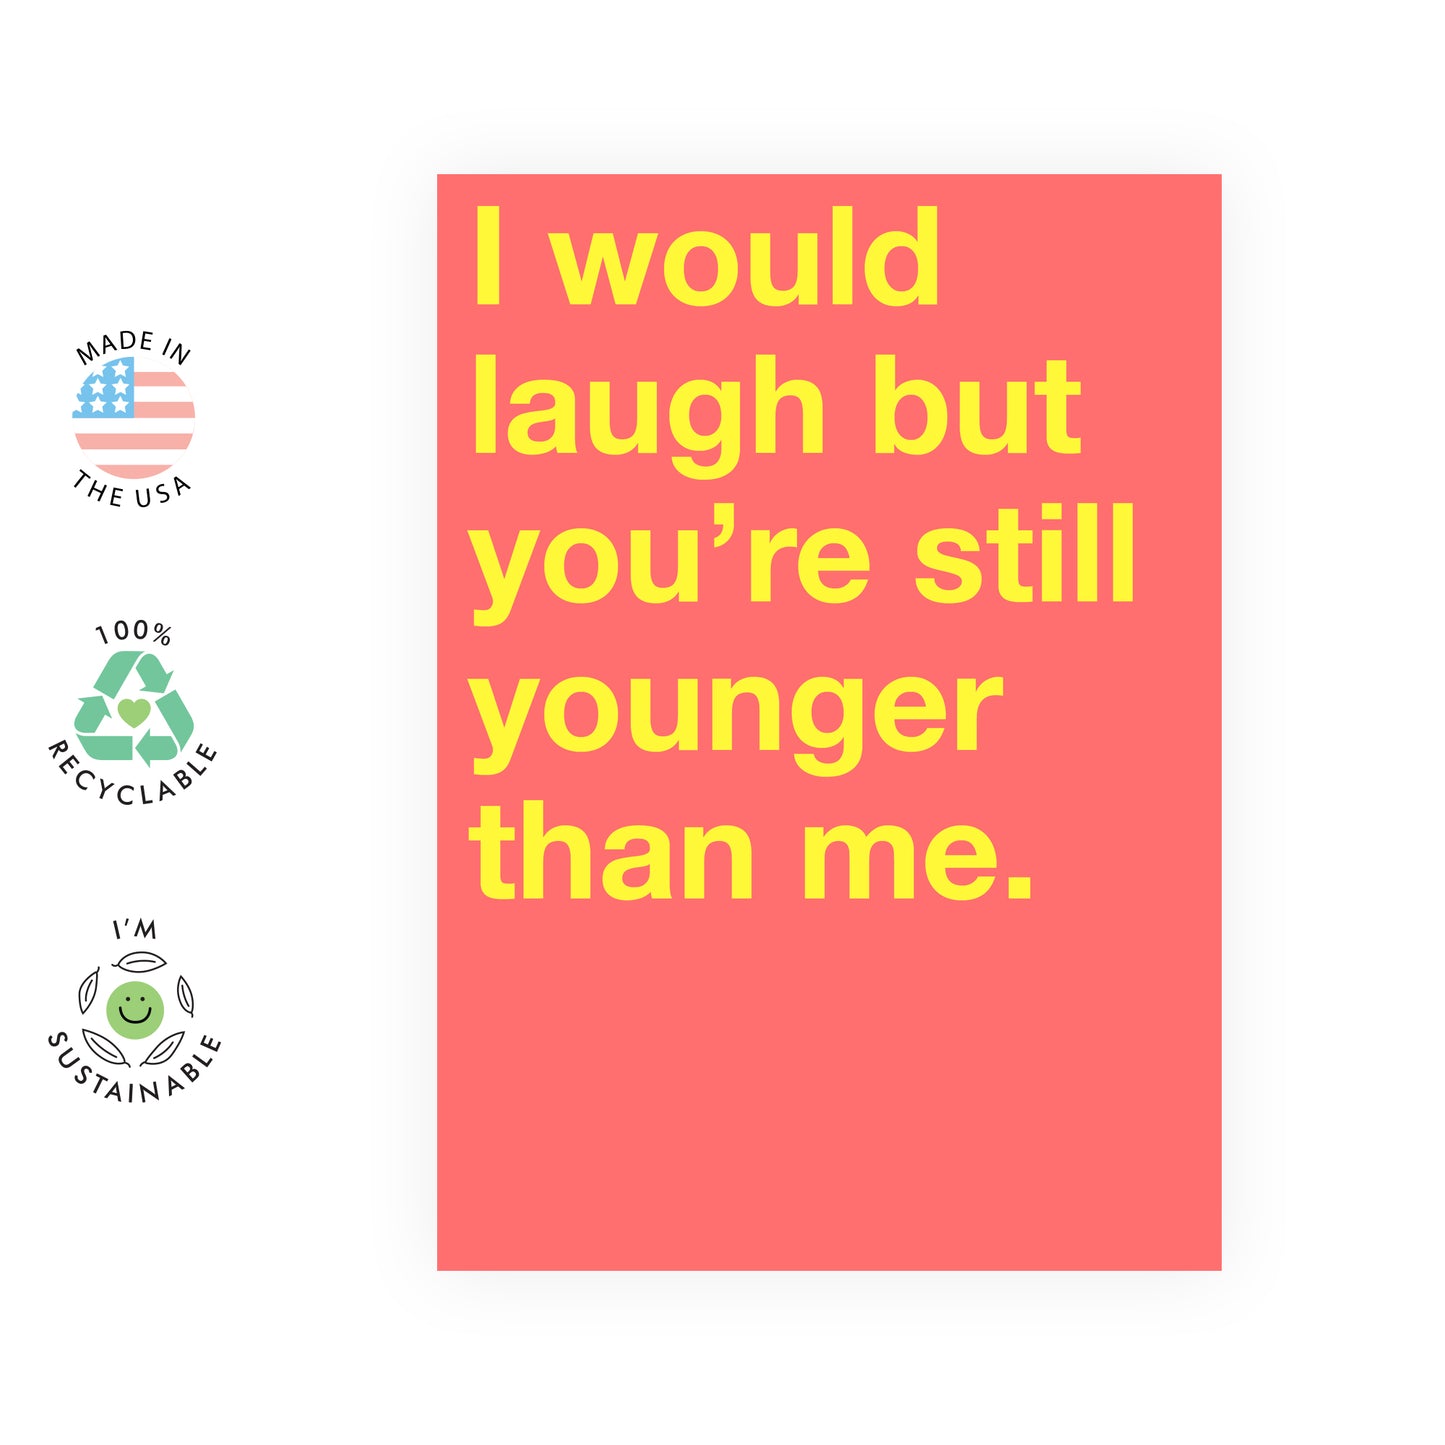 Funny Birthday Card - I Would Laugh But You're Still Younger - For Men Women Him Her